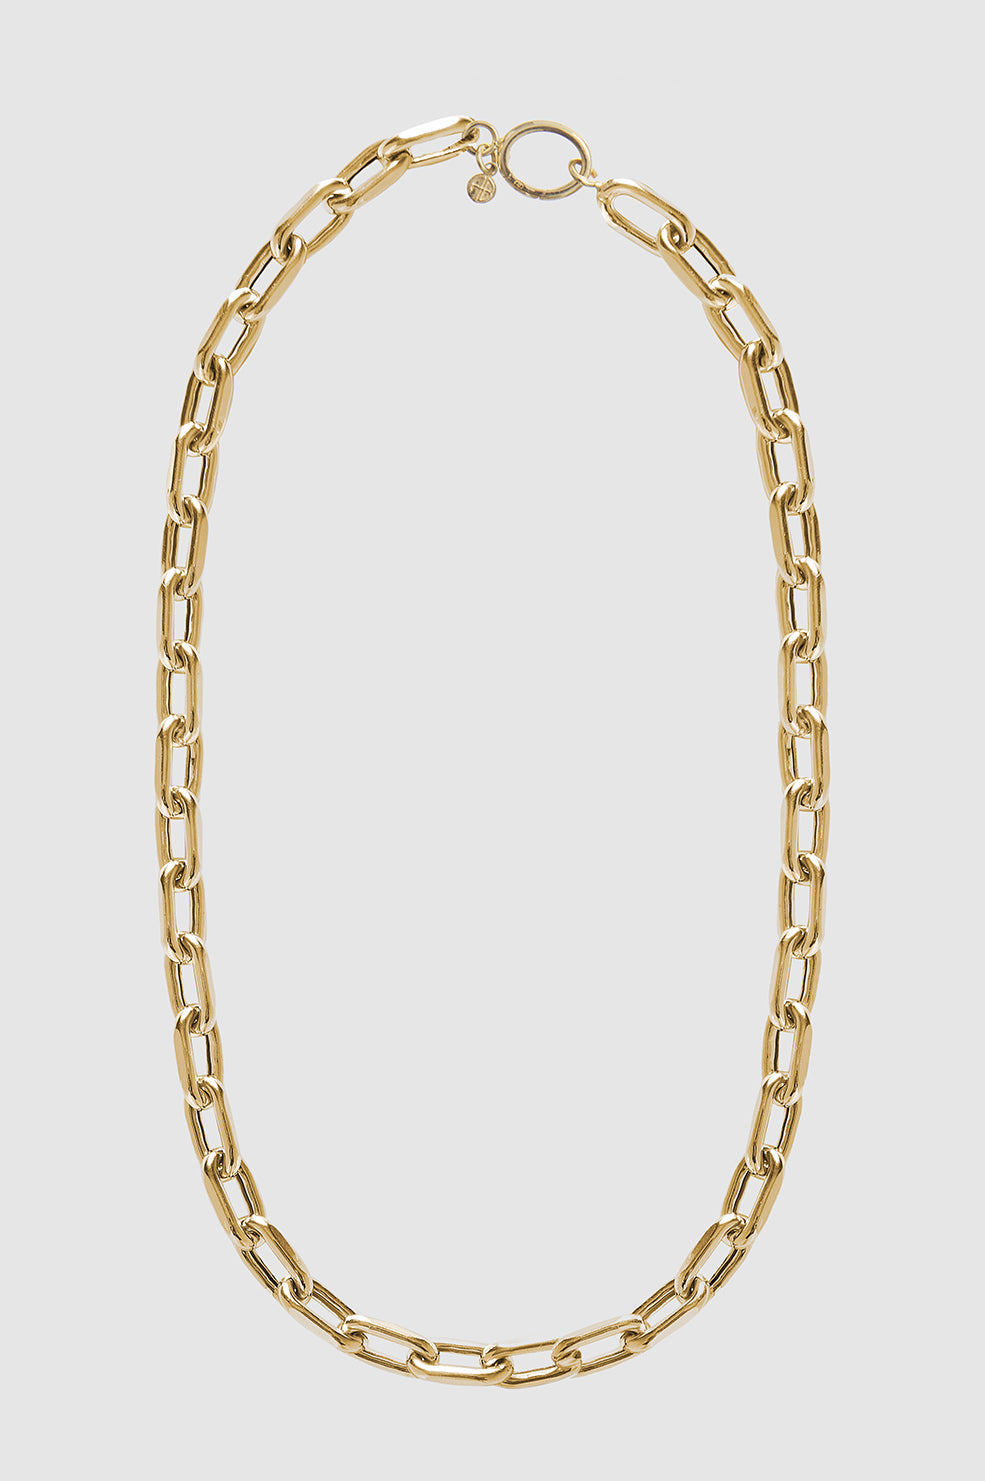 ANINE BING LINK NECKLACE - 14k Gold - Front View